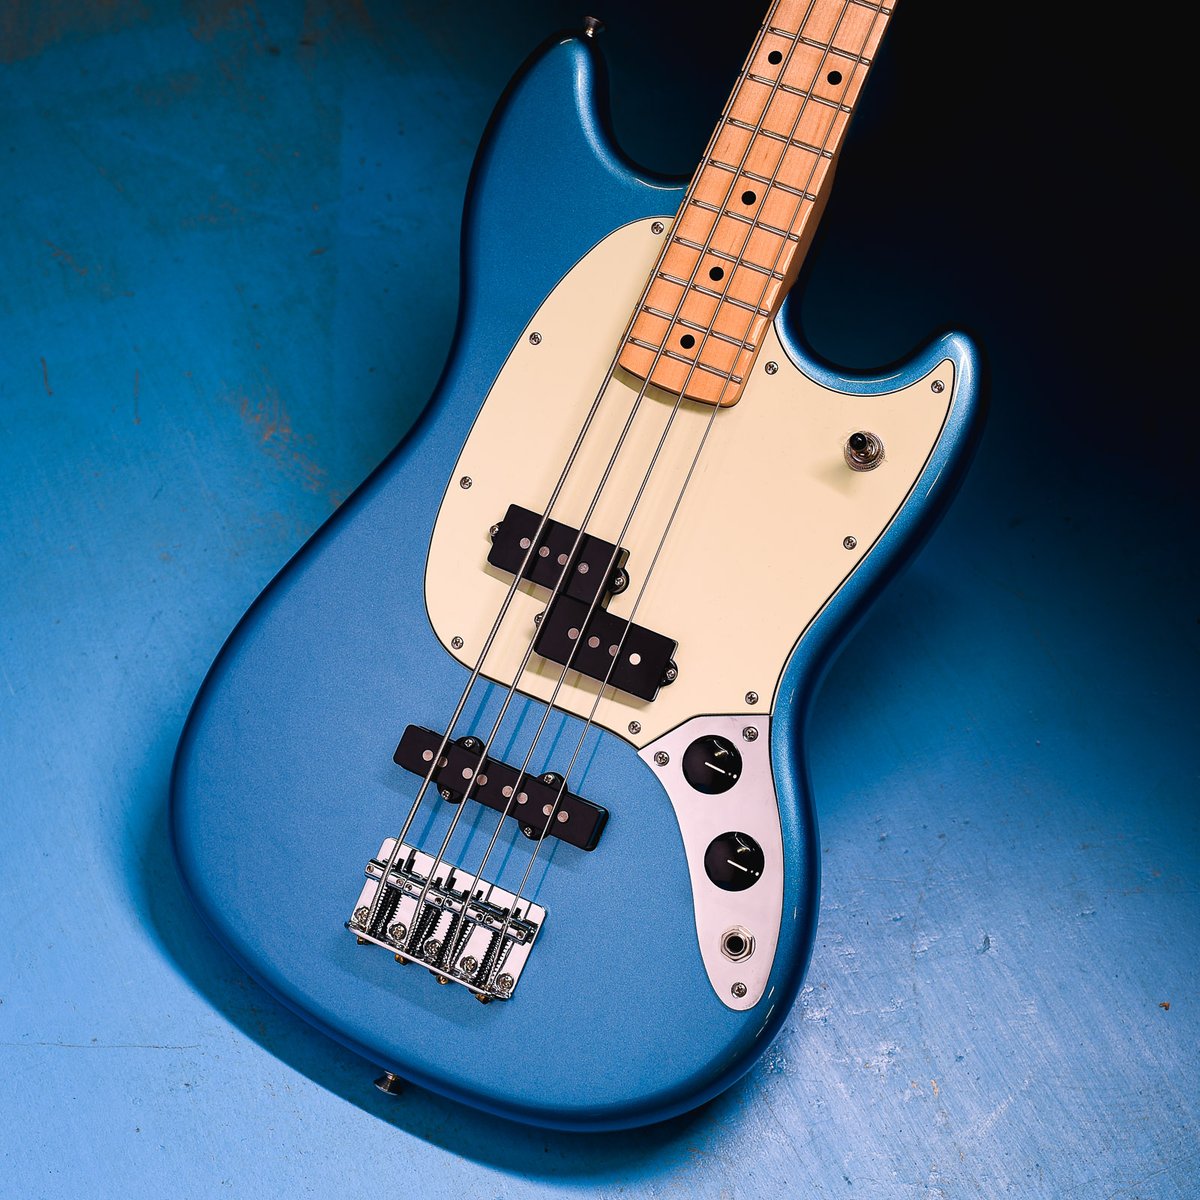 We want to give you the blues. Specifically, the Lake Placid Blues. Call today to discuss your trade and resale options and we’ll help you land this CME Exclusive @fender Offset Series Mustang Bass PJ! bit.ly/3g9dng3 #chicagomusicexchange #thebassment #CMEexclusive